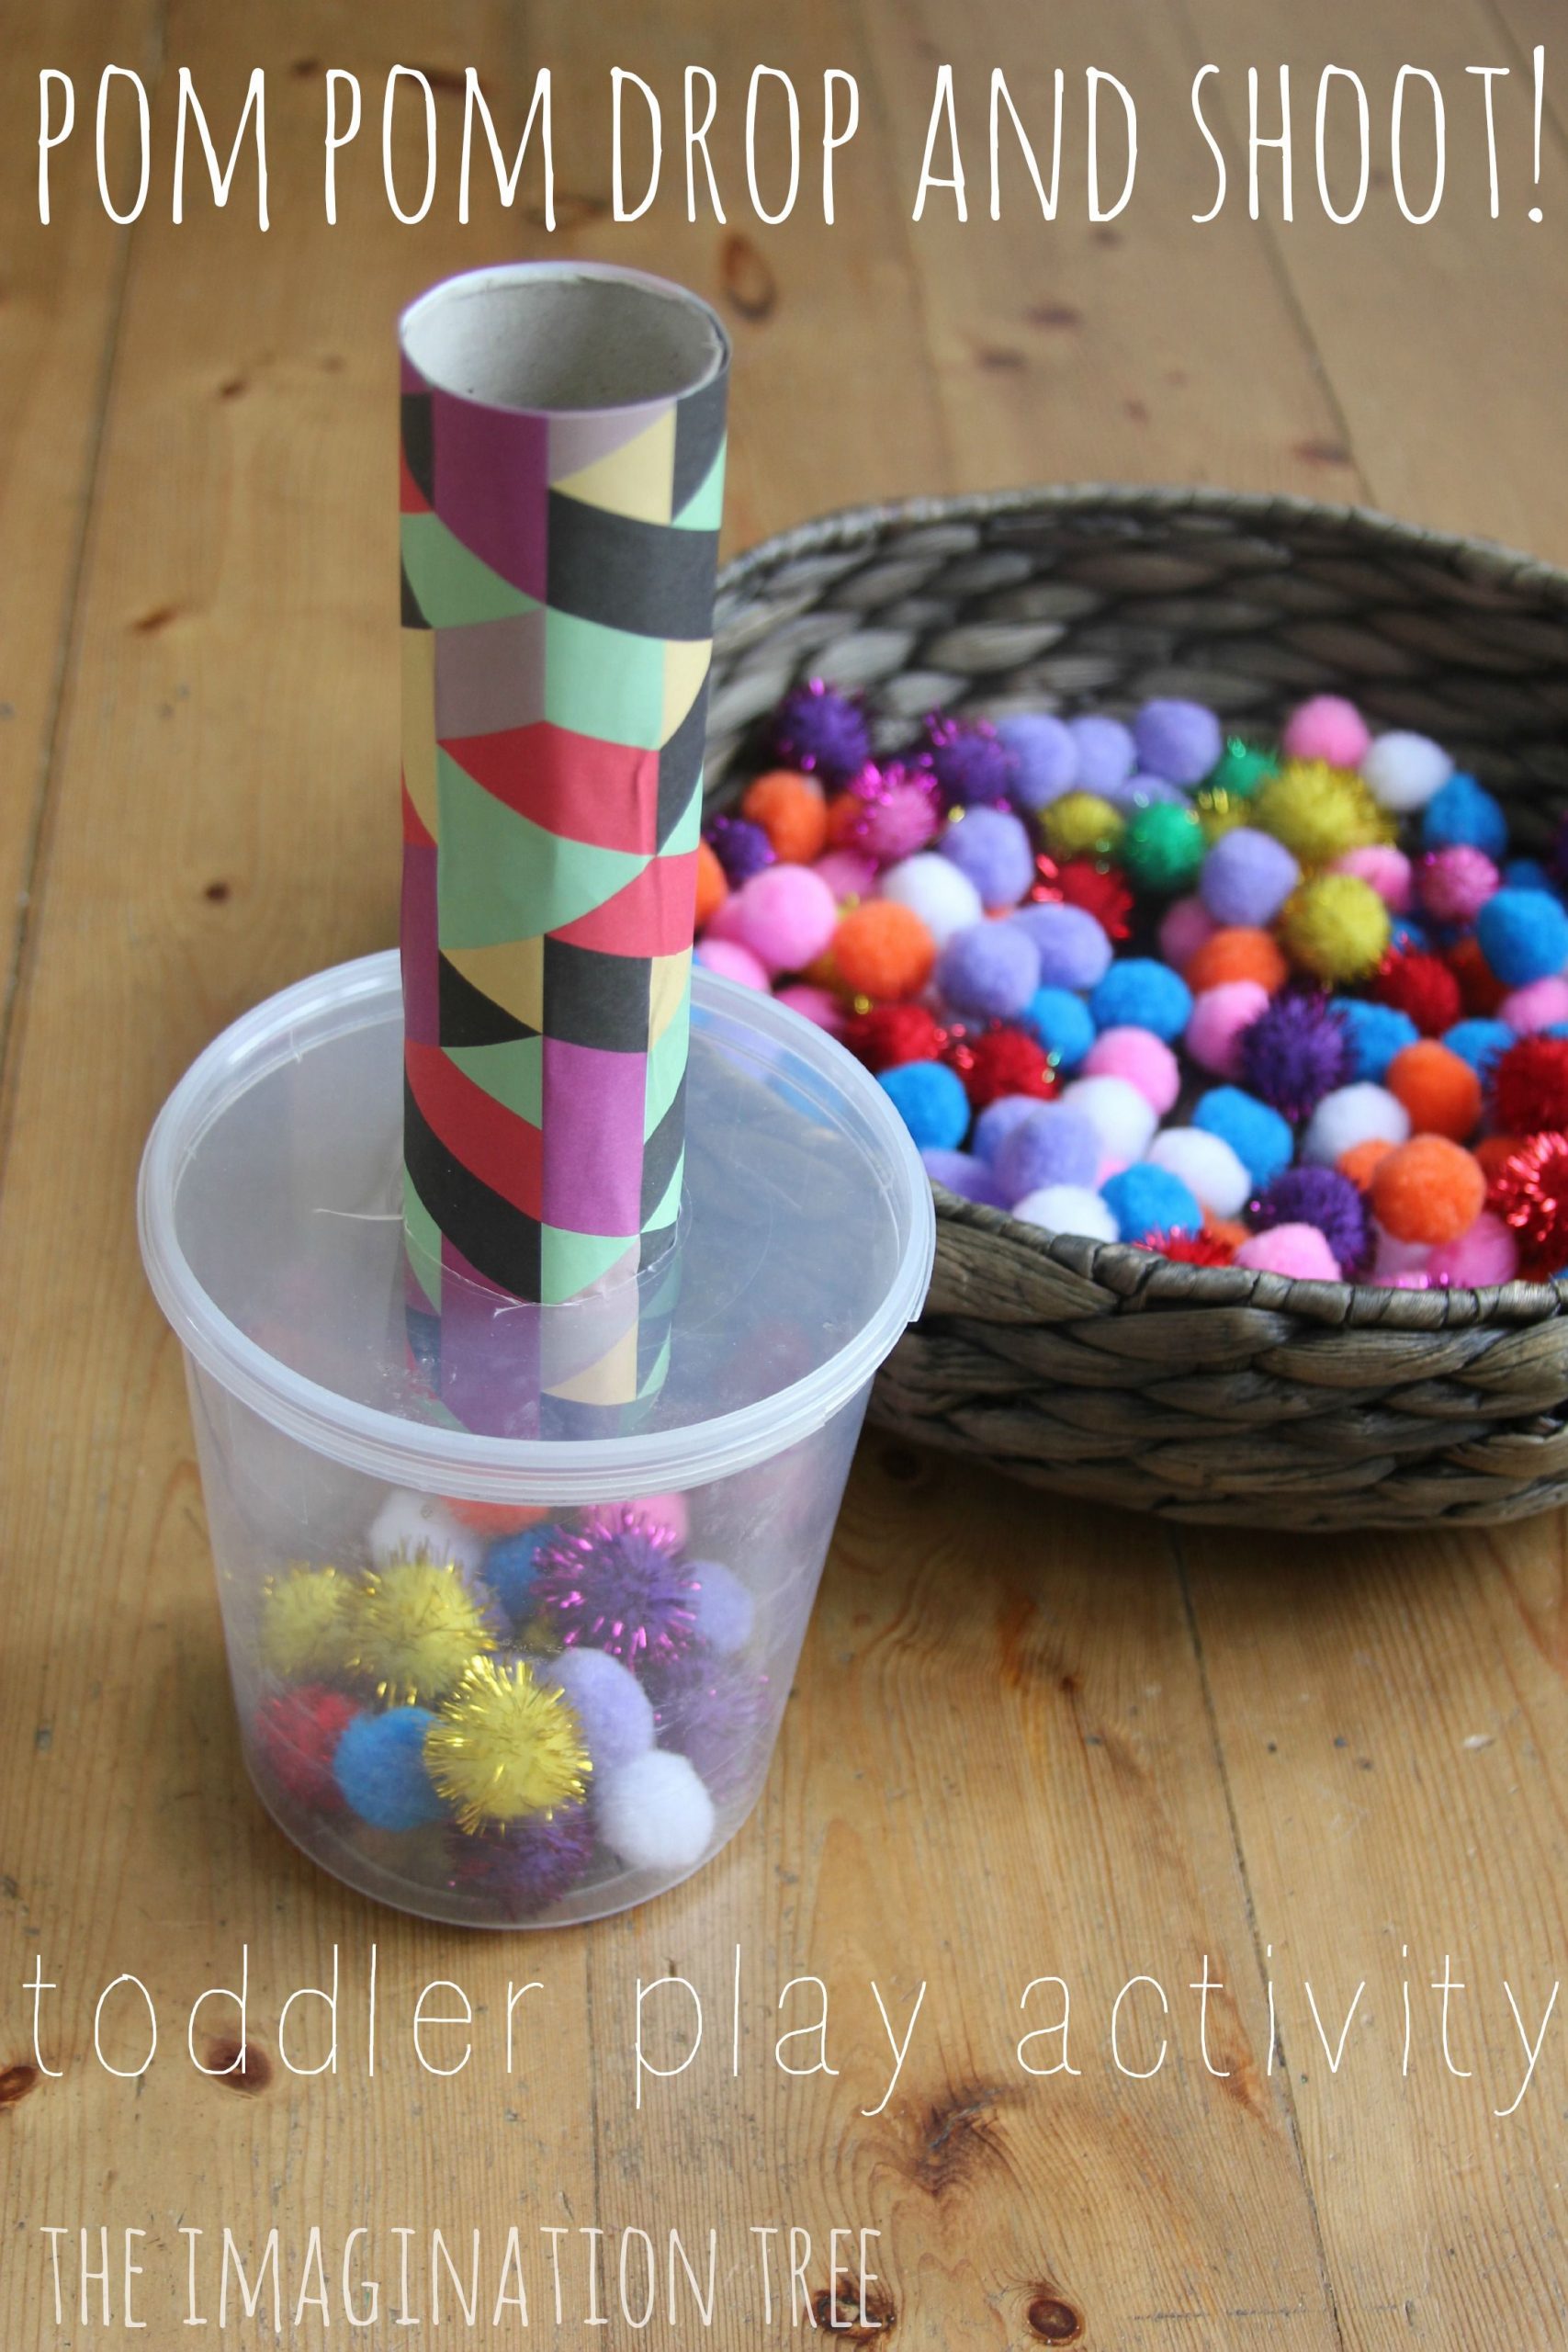 Pom Pom Drop And Shoot: Toddler Play (With Images) | Motor